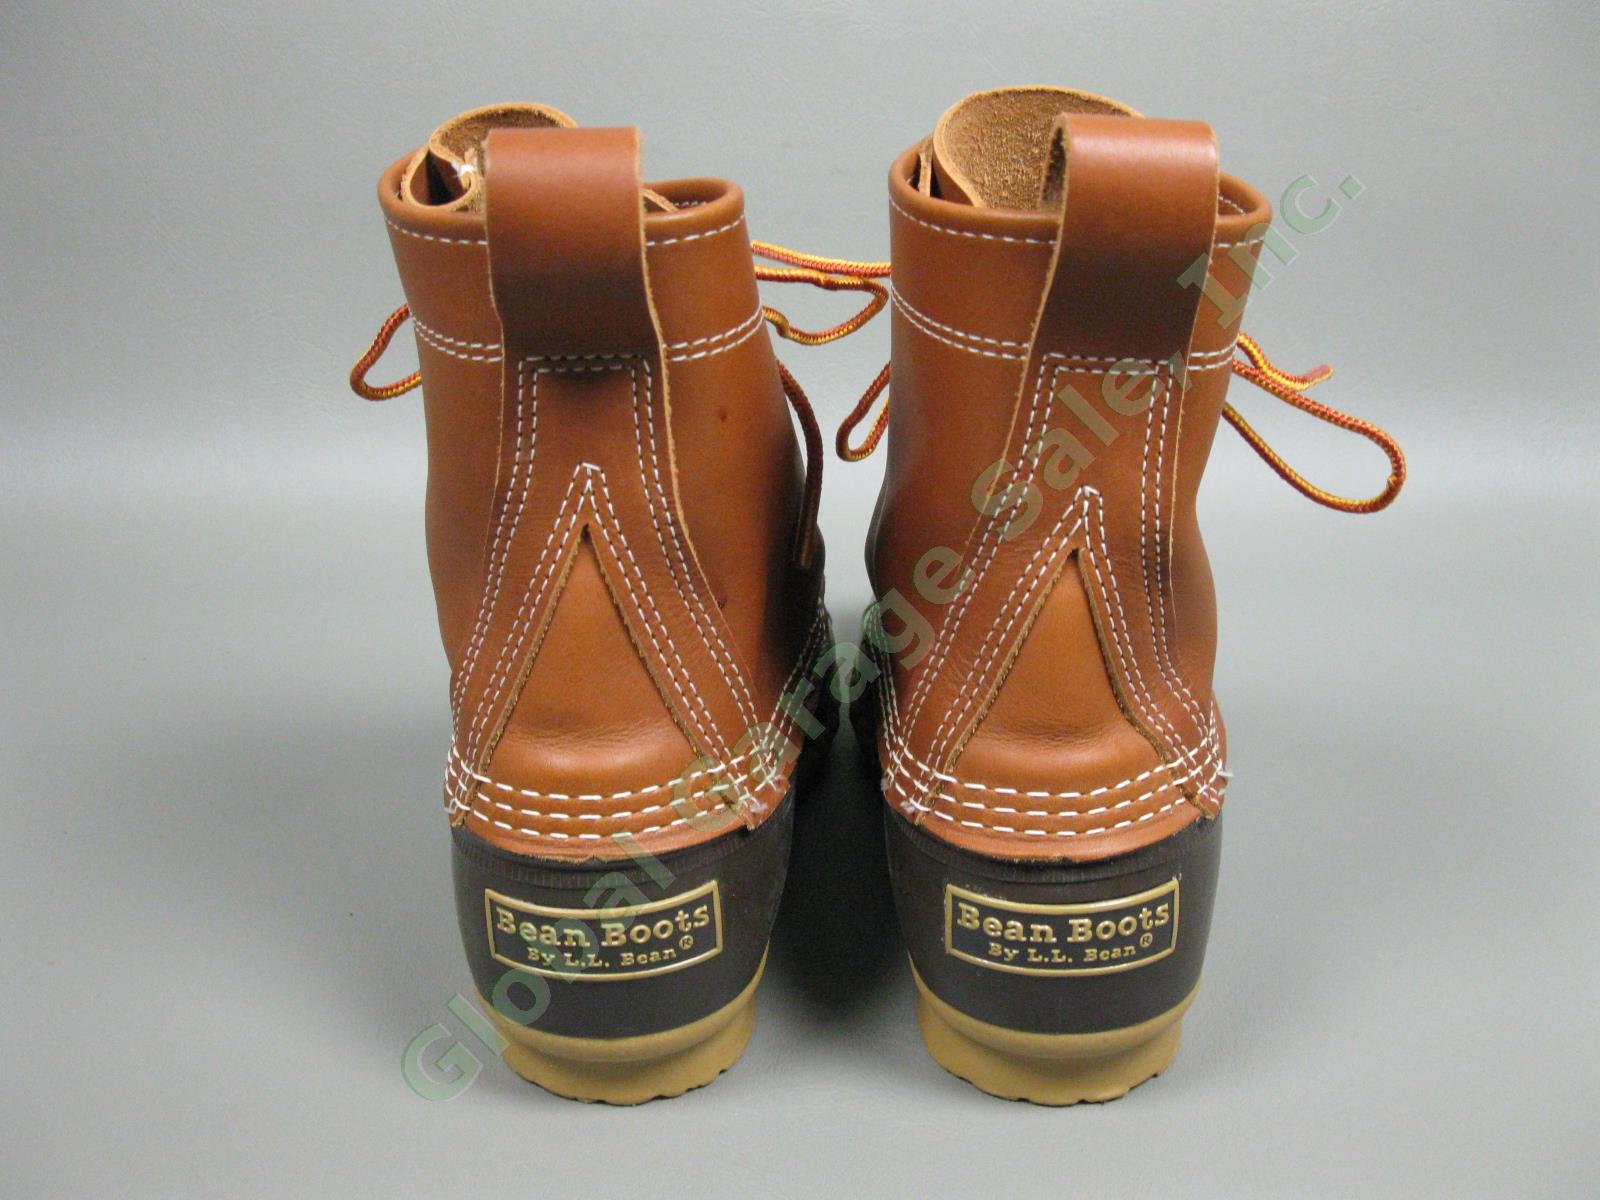 LL Bean Original Leather/Rubber 8" Duck Boots Womens Size 6 USA Made #06009 NR 3